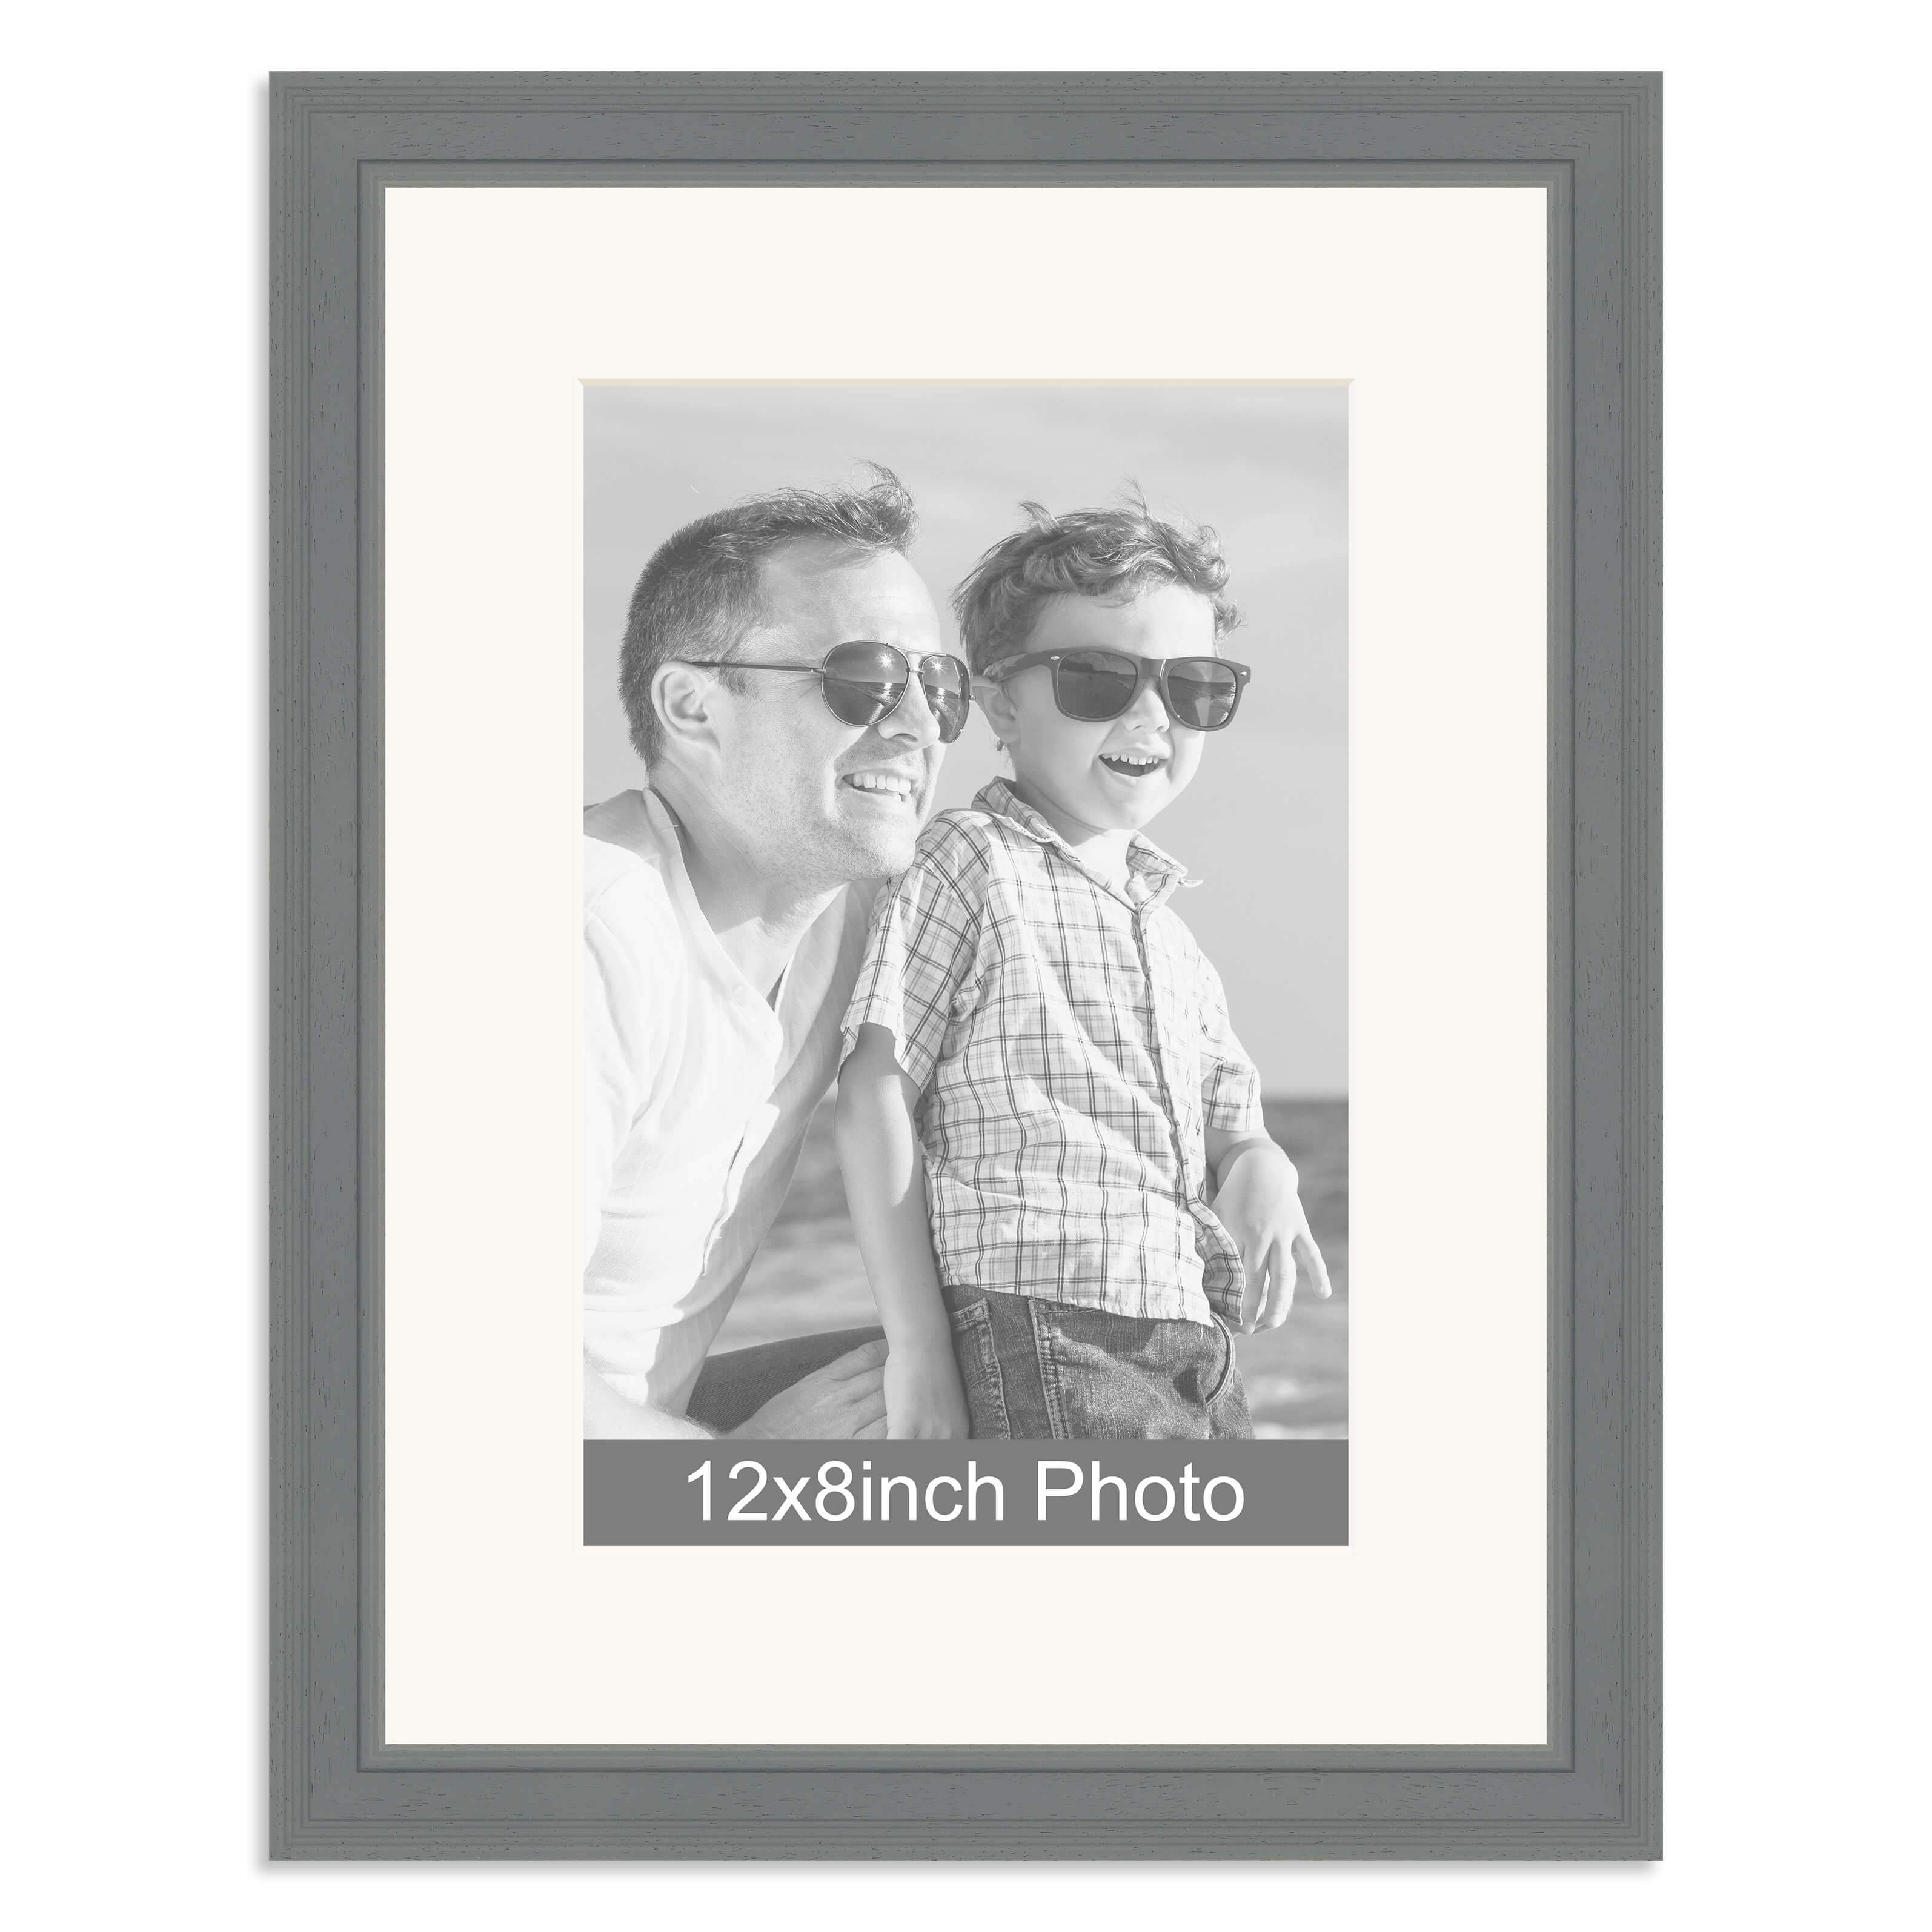 Grey Wooden Photo Frame for a 12×8/8x12in Photo – Photo uploaded below